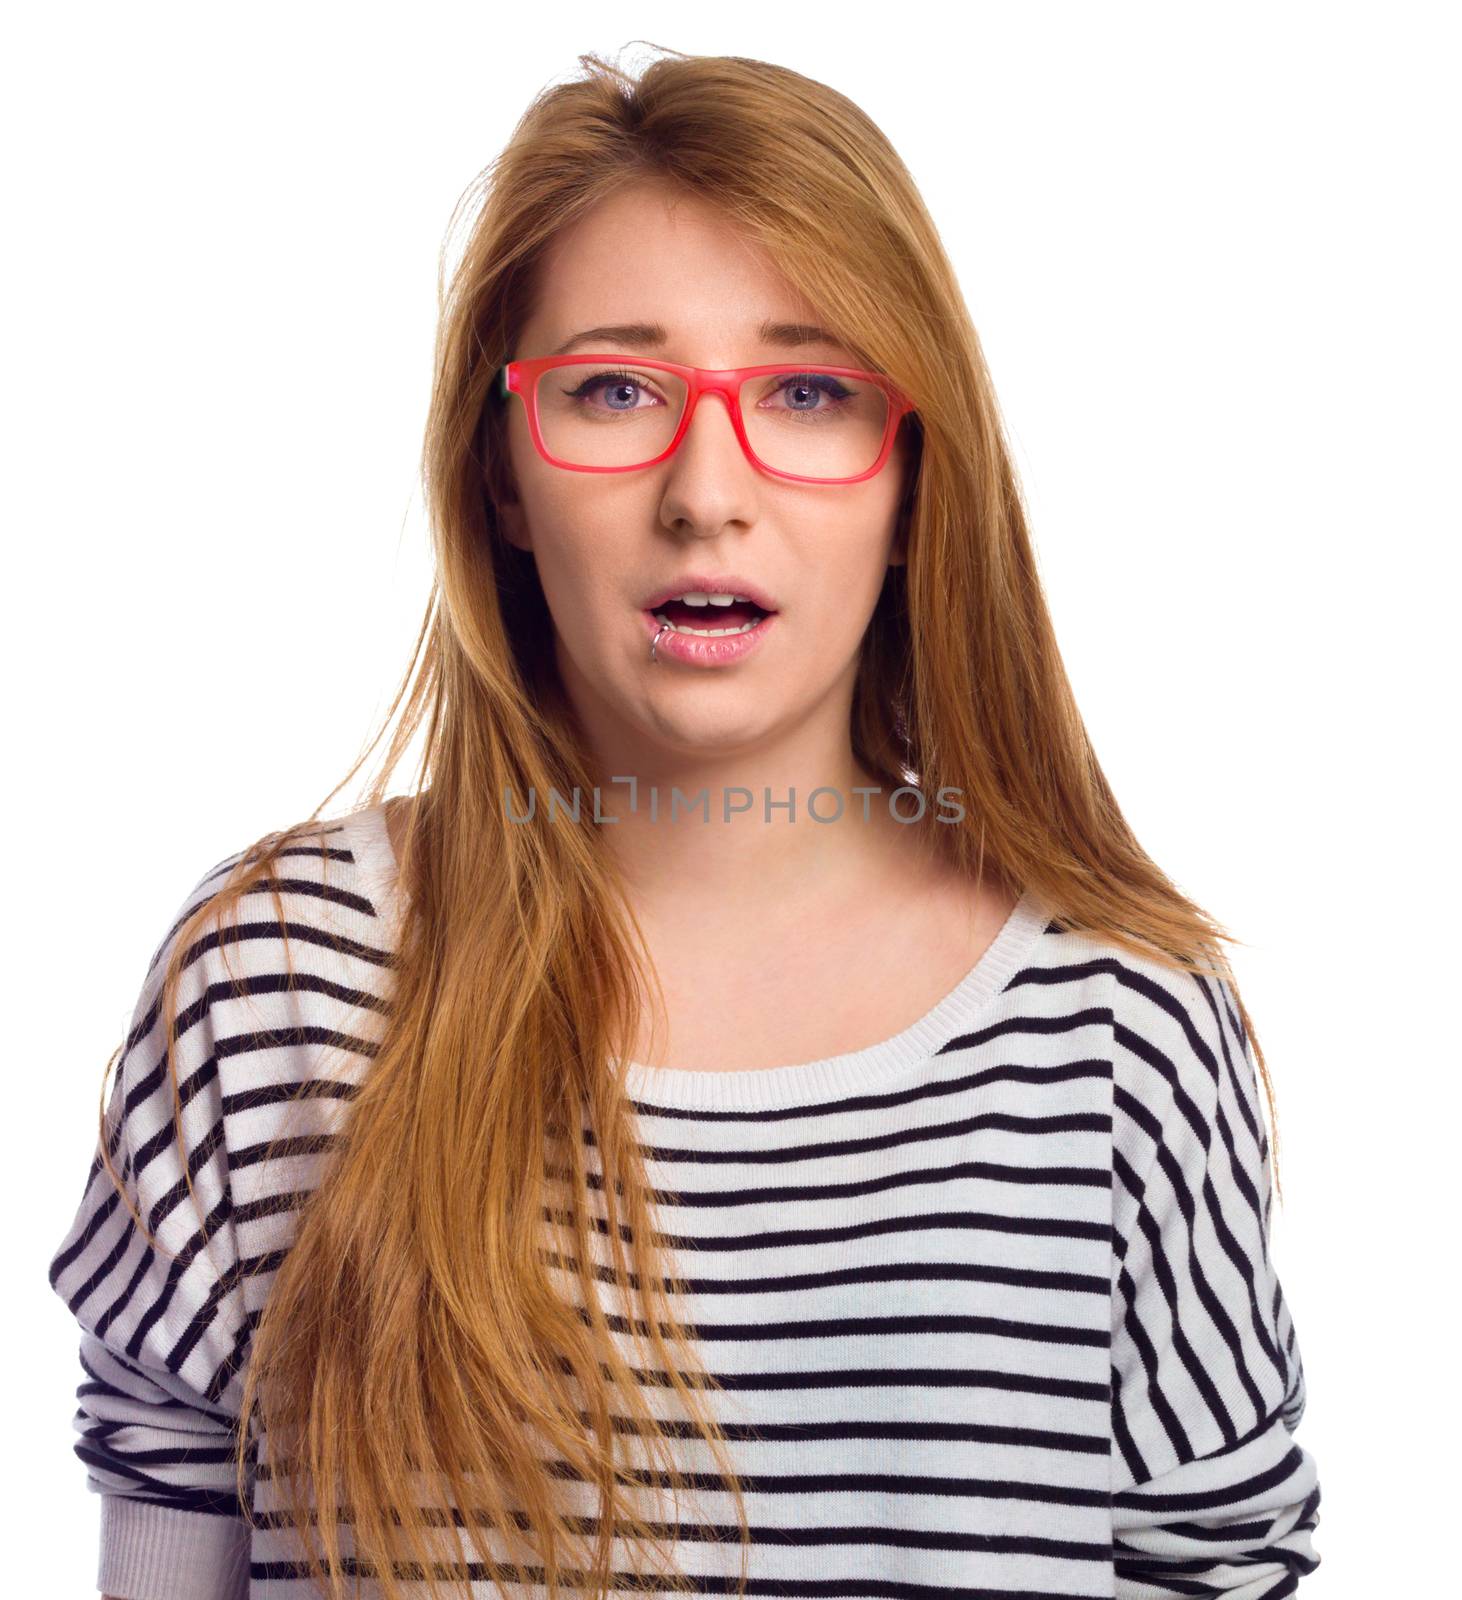 Funny portrait of excited woman wearing glasses eye wear. Woman making funny face expression isolated on white background by id7100